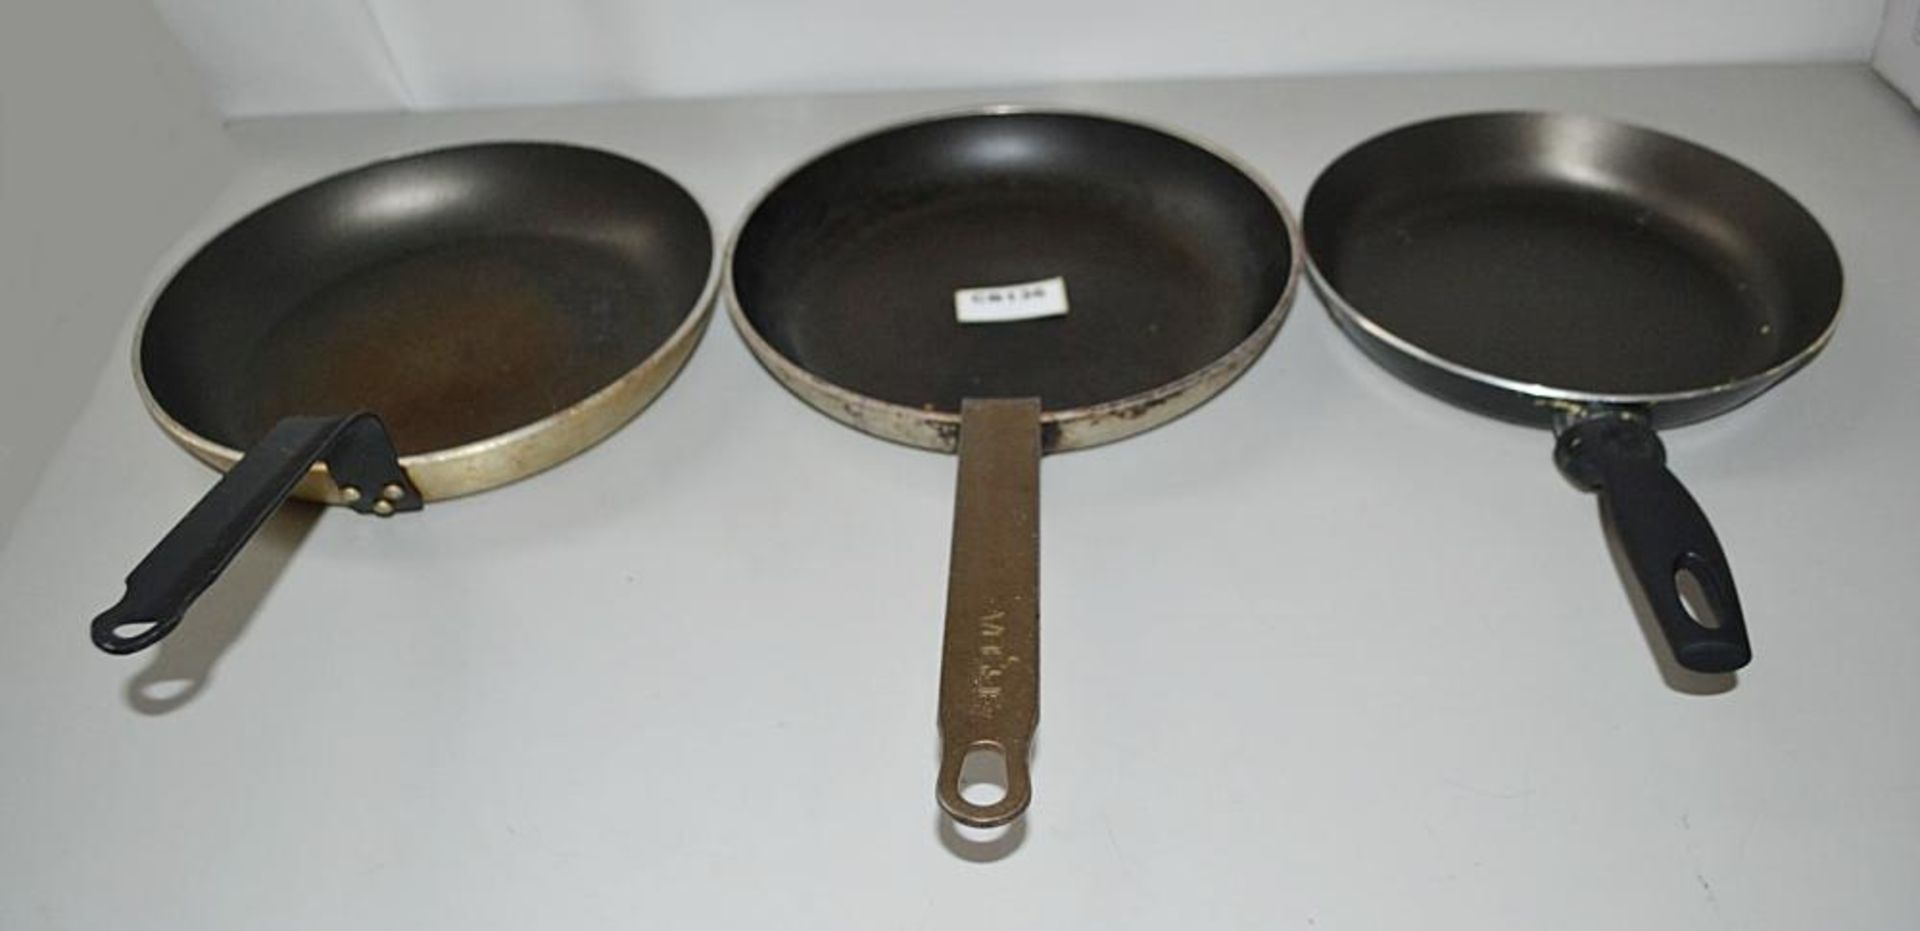 3 x Commercial Cooking Pans - Ref: CB136 - CL425 - Location: Altrincham WA14 - Used In Good Conditio